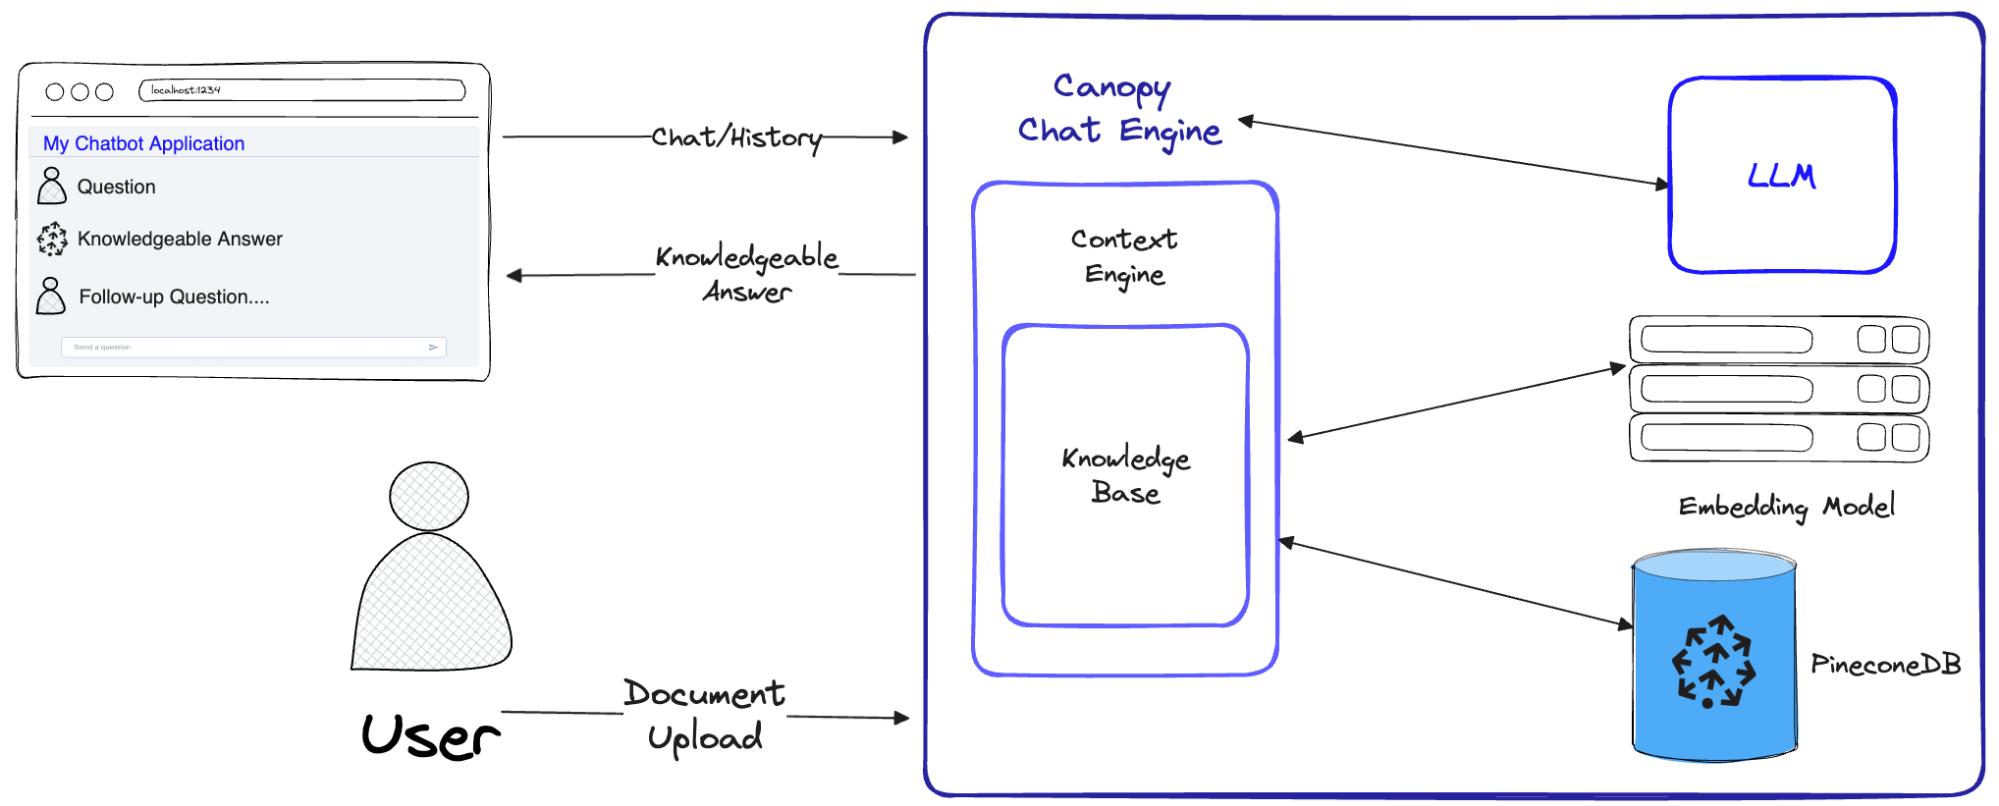 A diagram demonstrating how the Canopy Chat Engine implements the entire RAG workflow. Source - Introducing Canopy: An easy, free, and flexible RAG framework powered by Pinecone